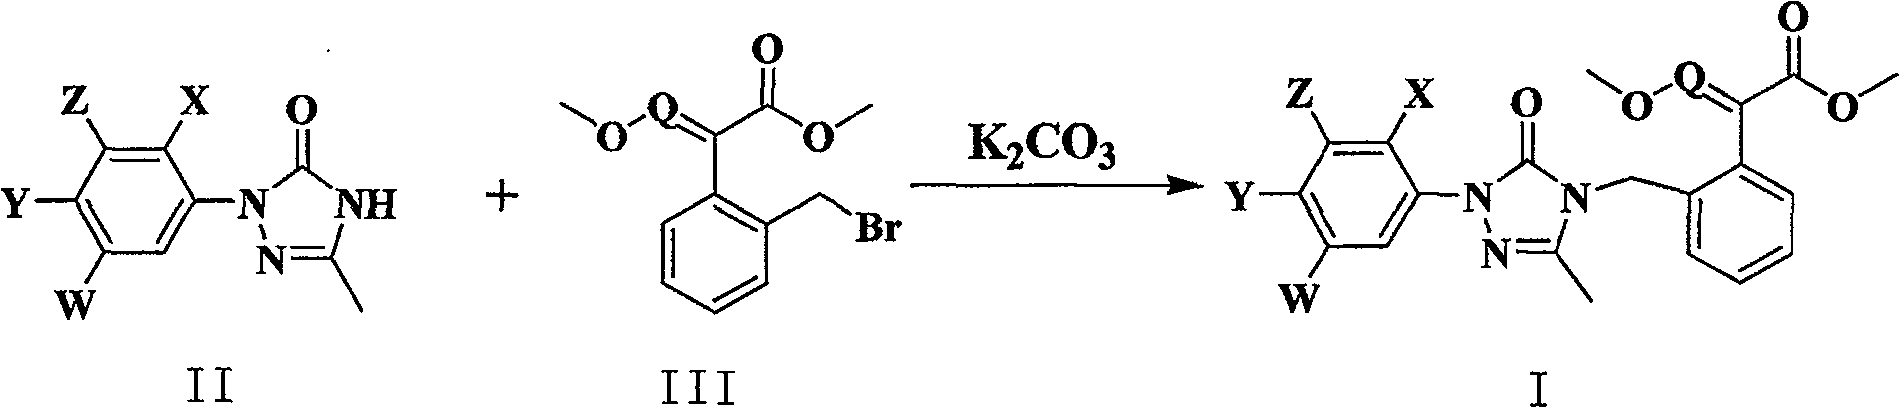 Synthesis of 4-substituted methoxy acrylate-1,2,4-triazolinones derivatives and herbicidal activity